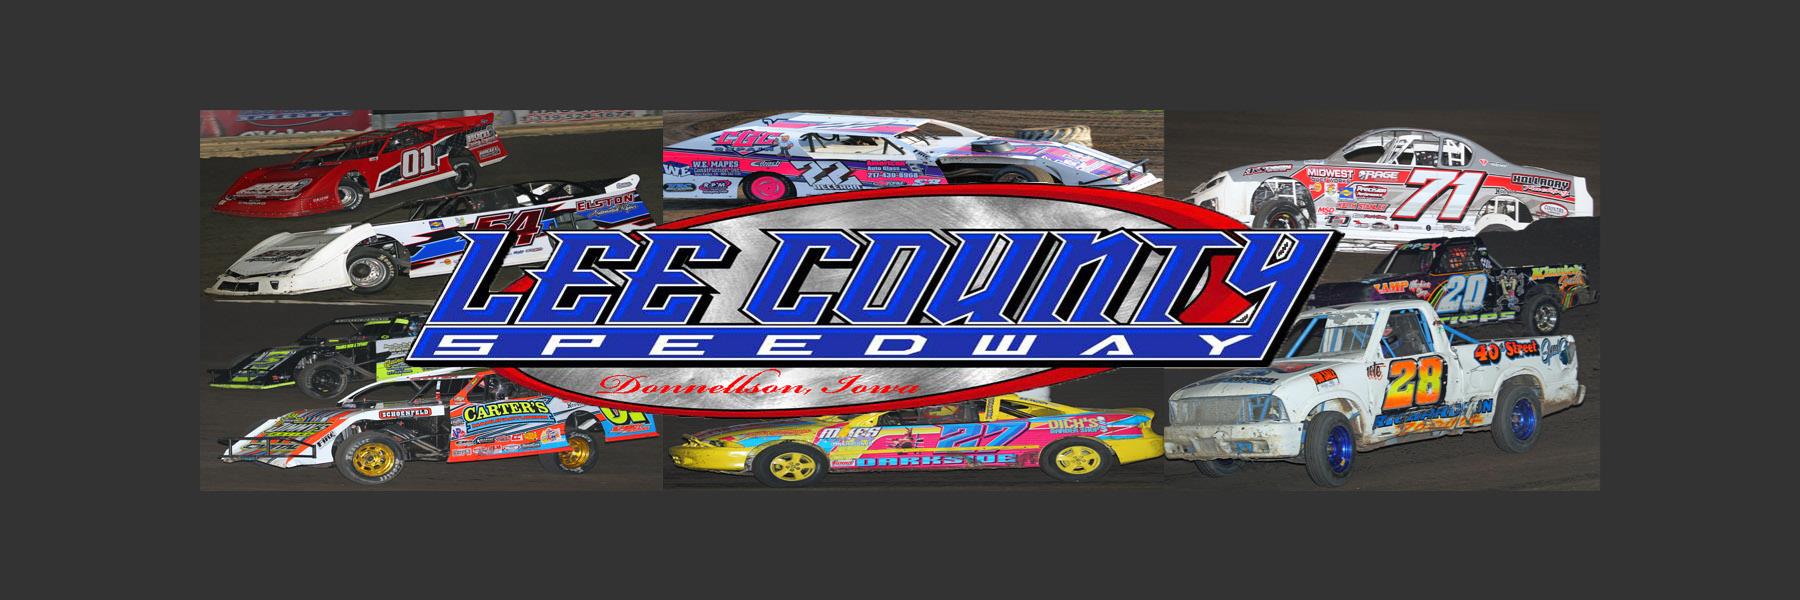 10/8/2022 - Lee County Speedway